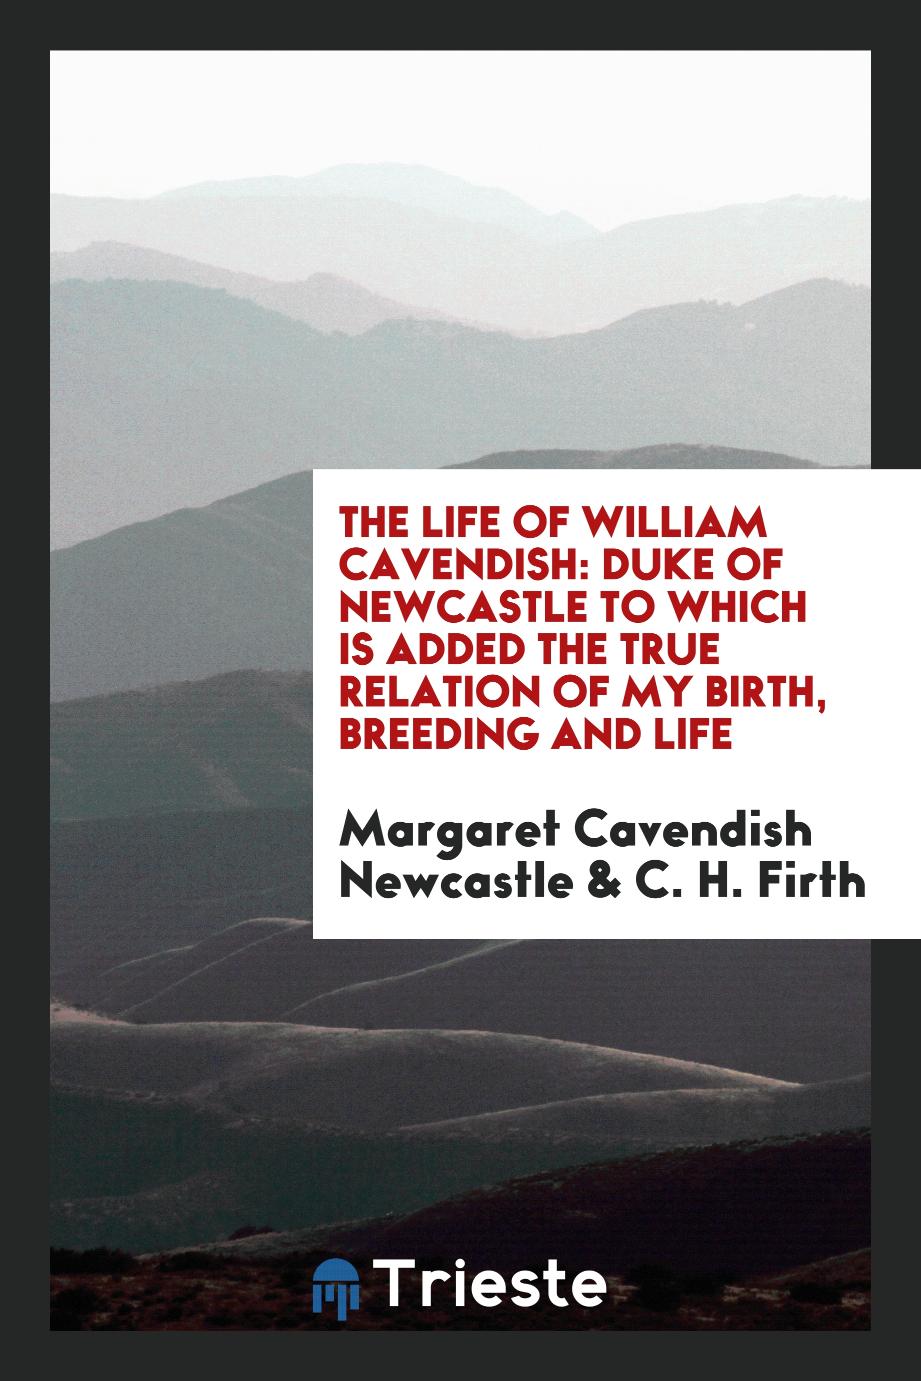 The life of William Cavendish: Duke of Newcastle to which is added the true relation of my birth, breeding and life